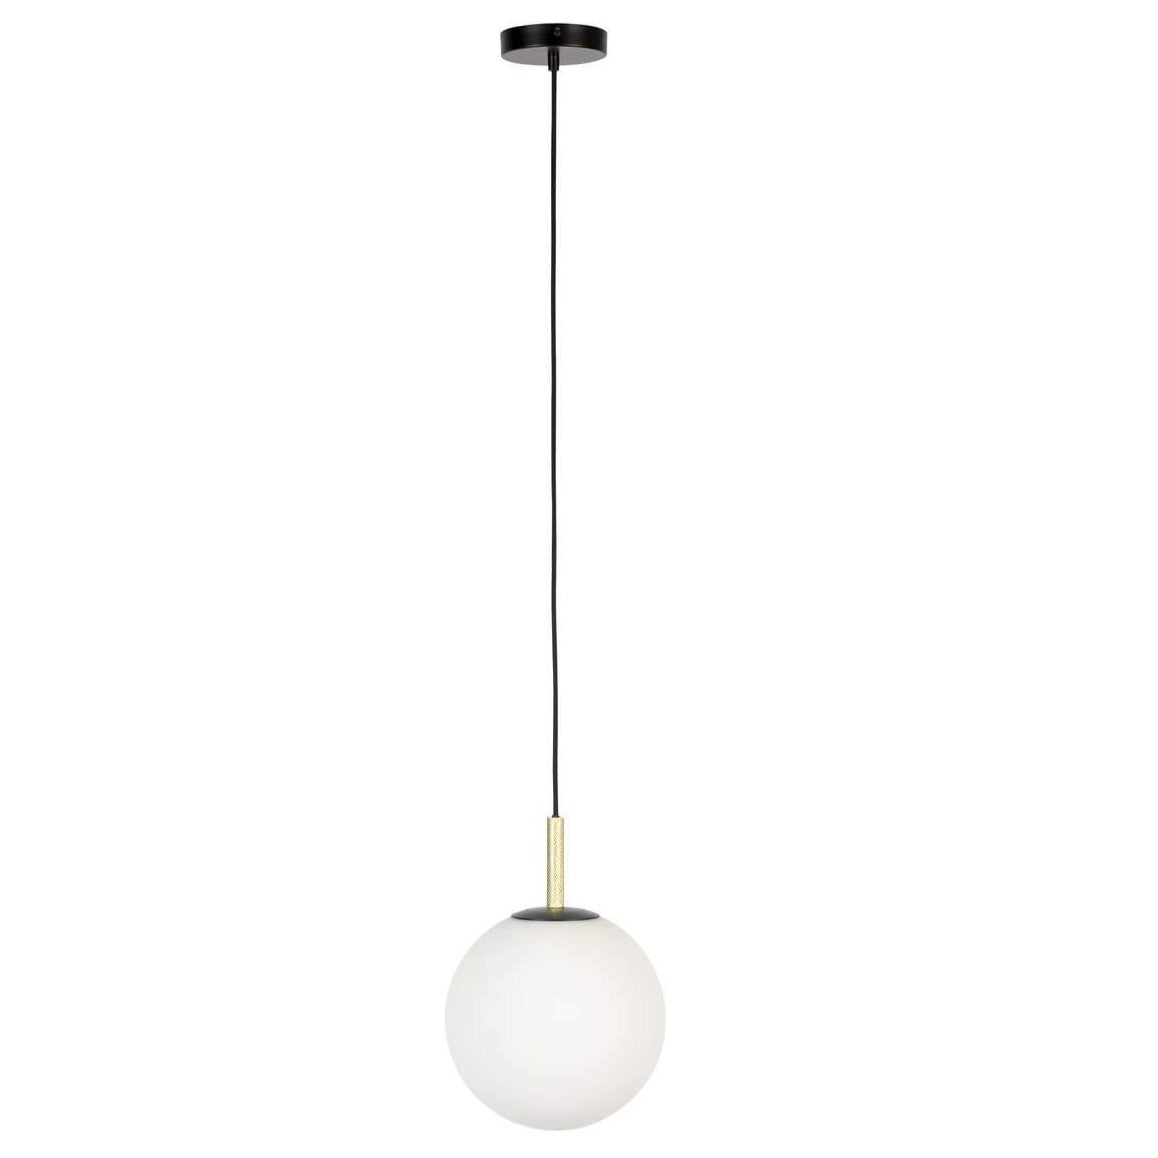 Orion is a unique hanging lamp that will complement any modern dining room. A great place to hang it is the space above the table. Thanks to its design, it is also great in a minimalist bedroom. A glass lampshade in milk will bring an elegance to every home. Metal elements along with embossed brass details will not overwhelm any room, even when a few are hanged side by side.